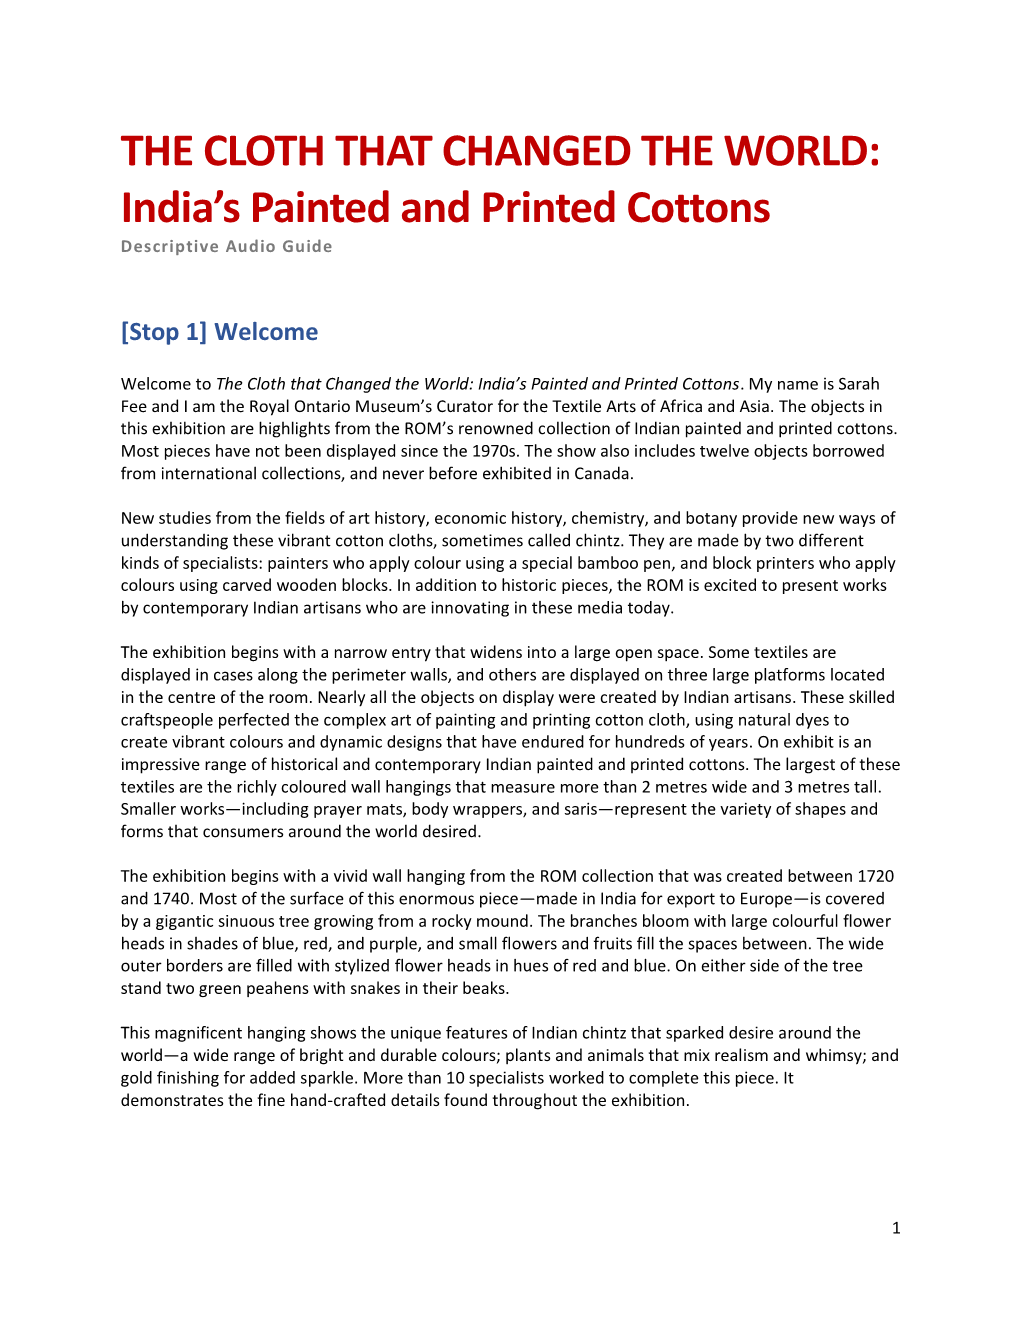 India's Painted and Printed Cottons